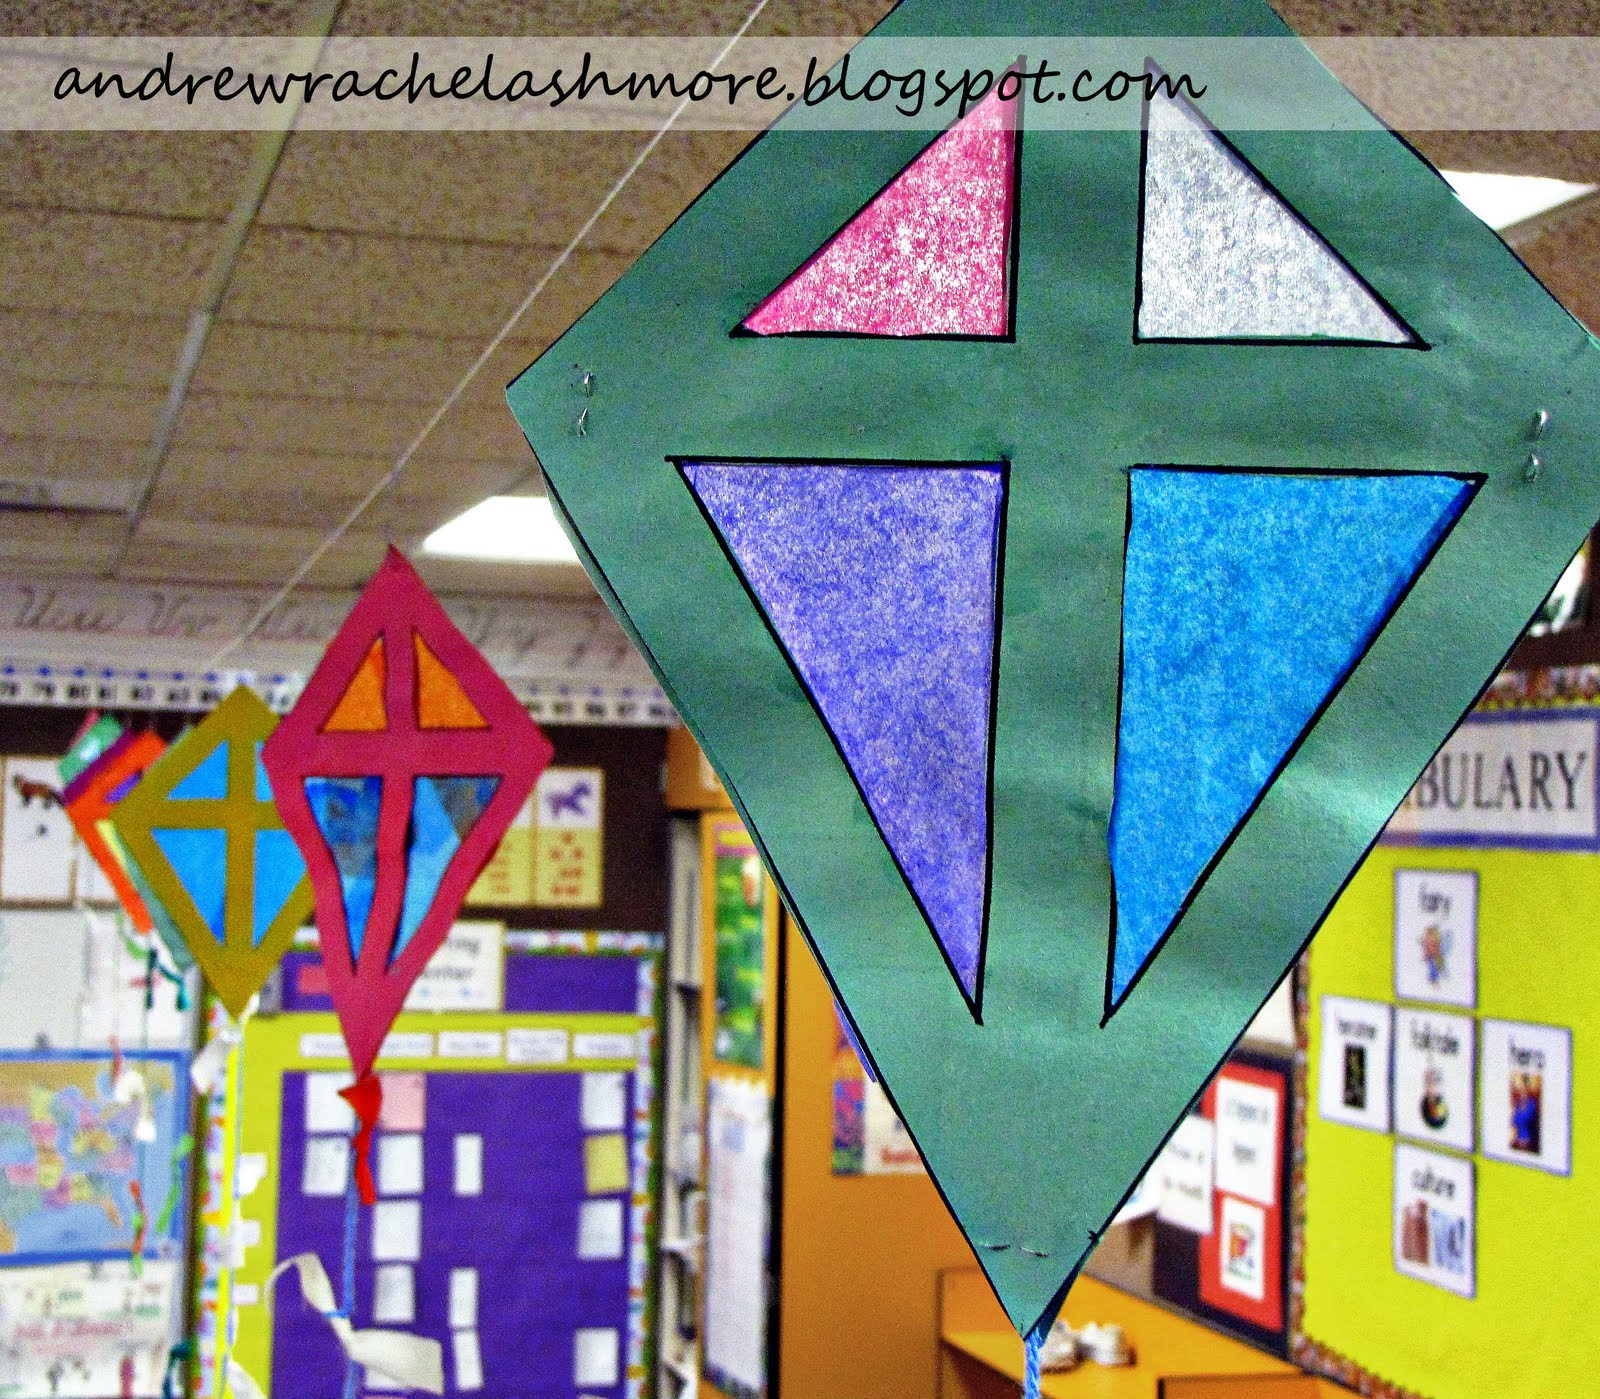 Kite Crafts For Kids
 Our Small Town Idaho Life KID S KITE CRAFT TUTORIAL free